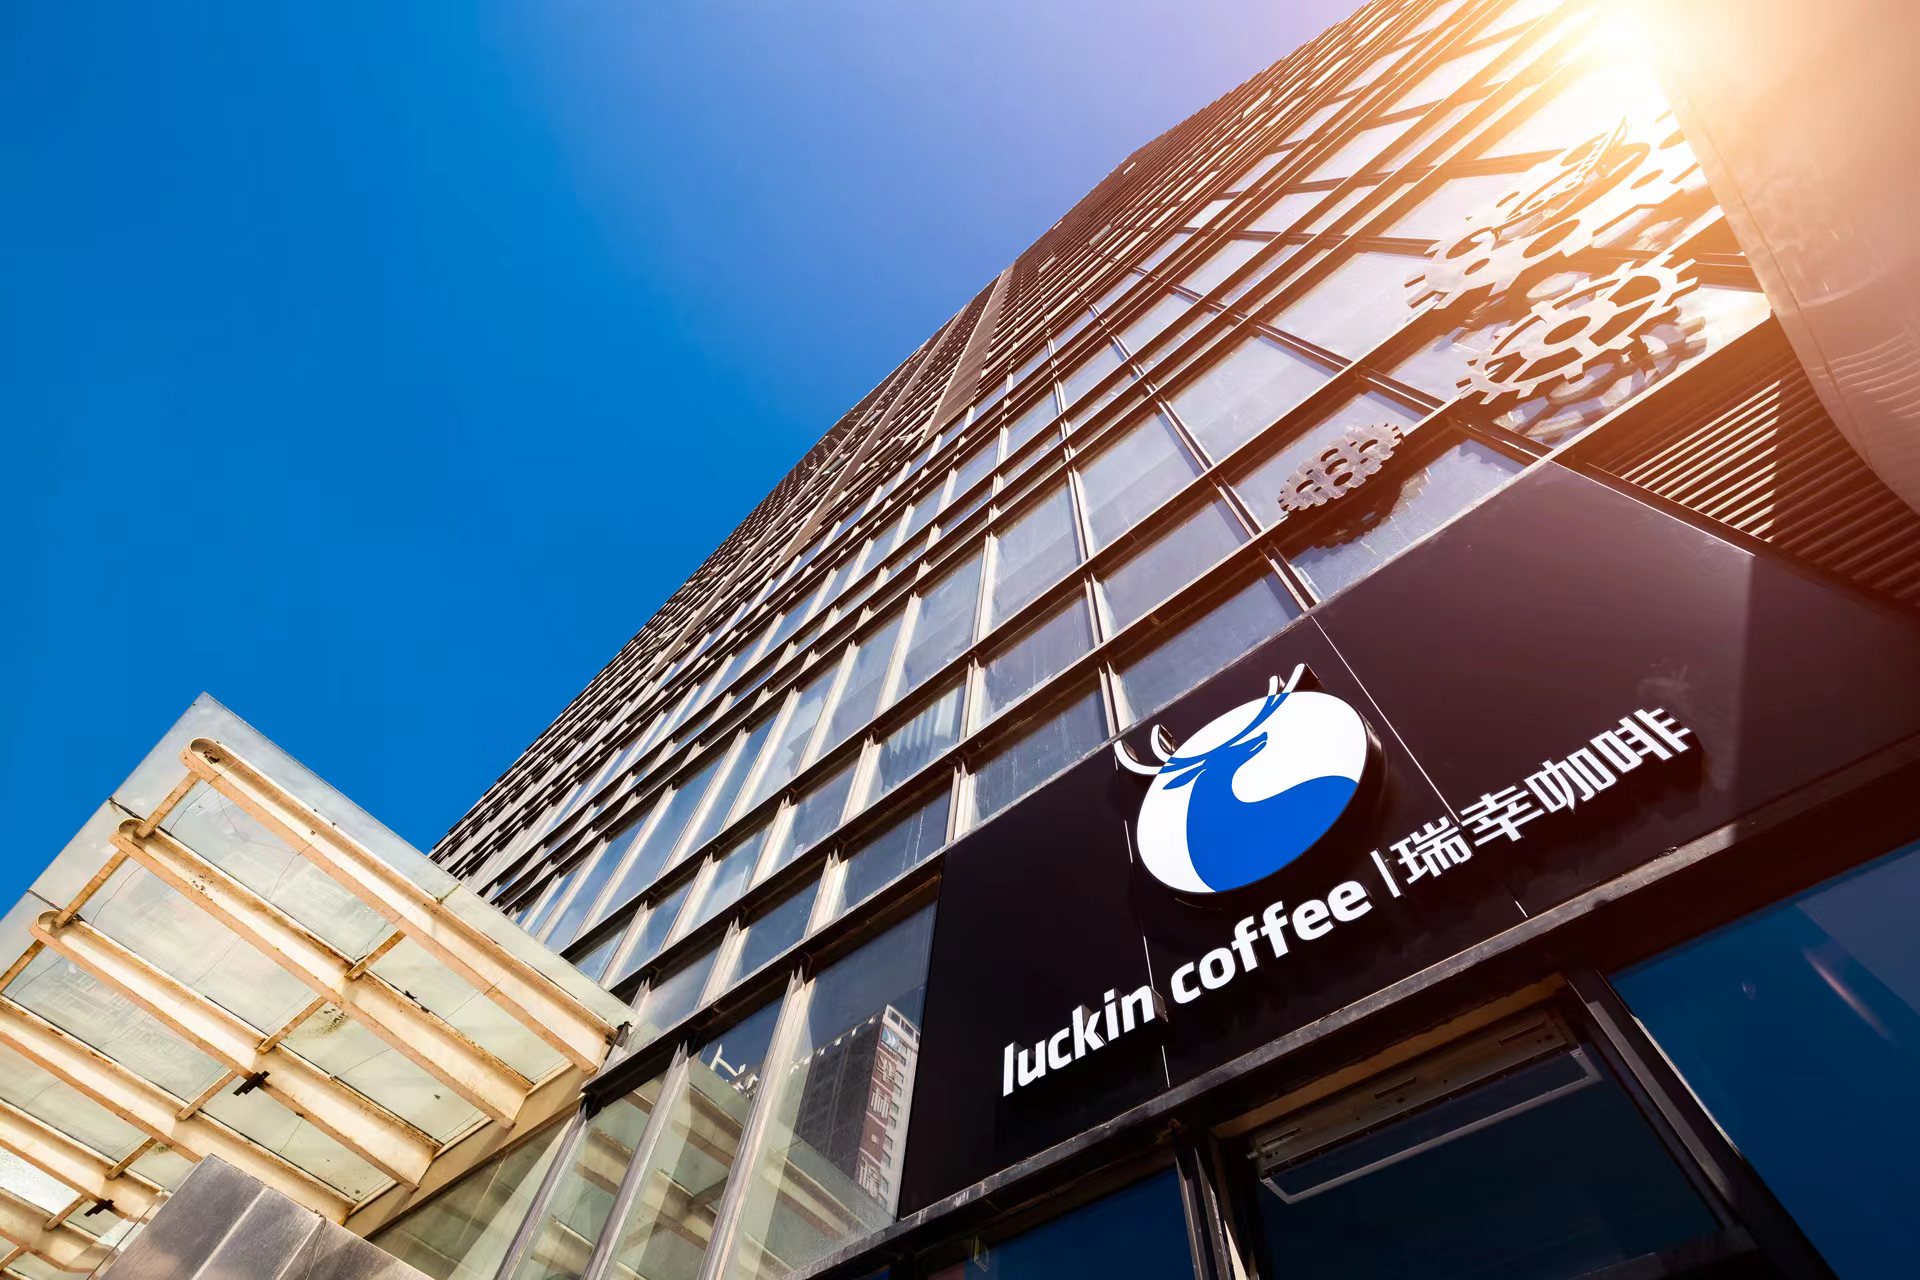 Consortium Led by Centurium Capital Acquires Stake in Luckin Coffee Through Secondary Purchase